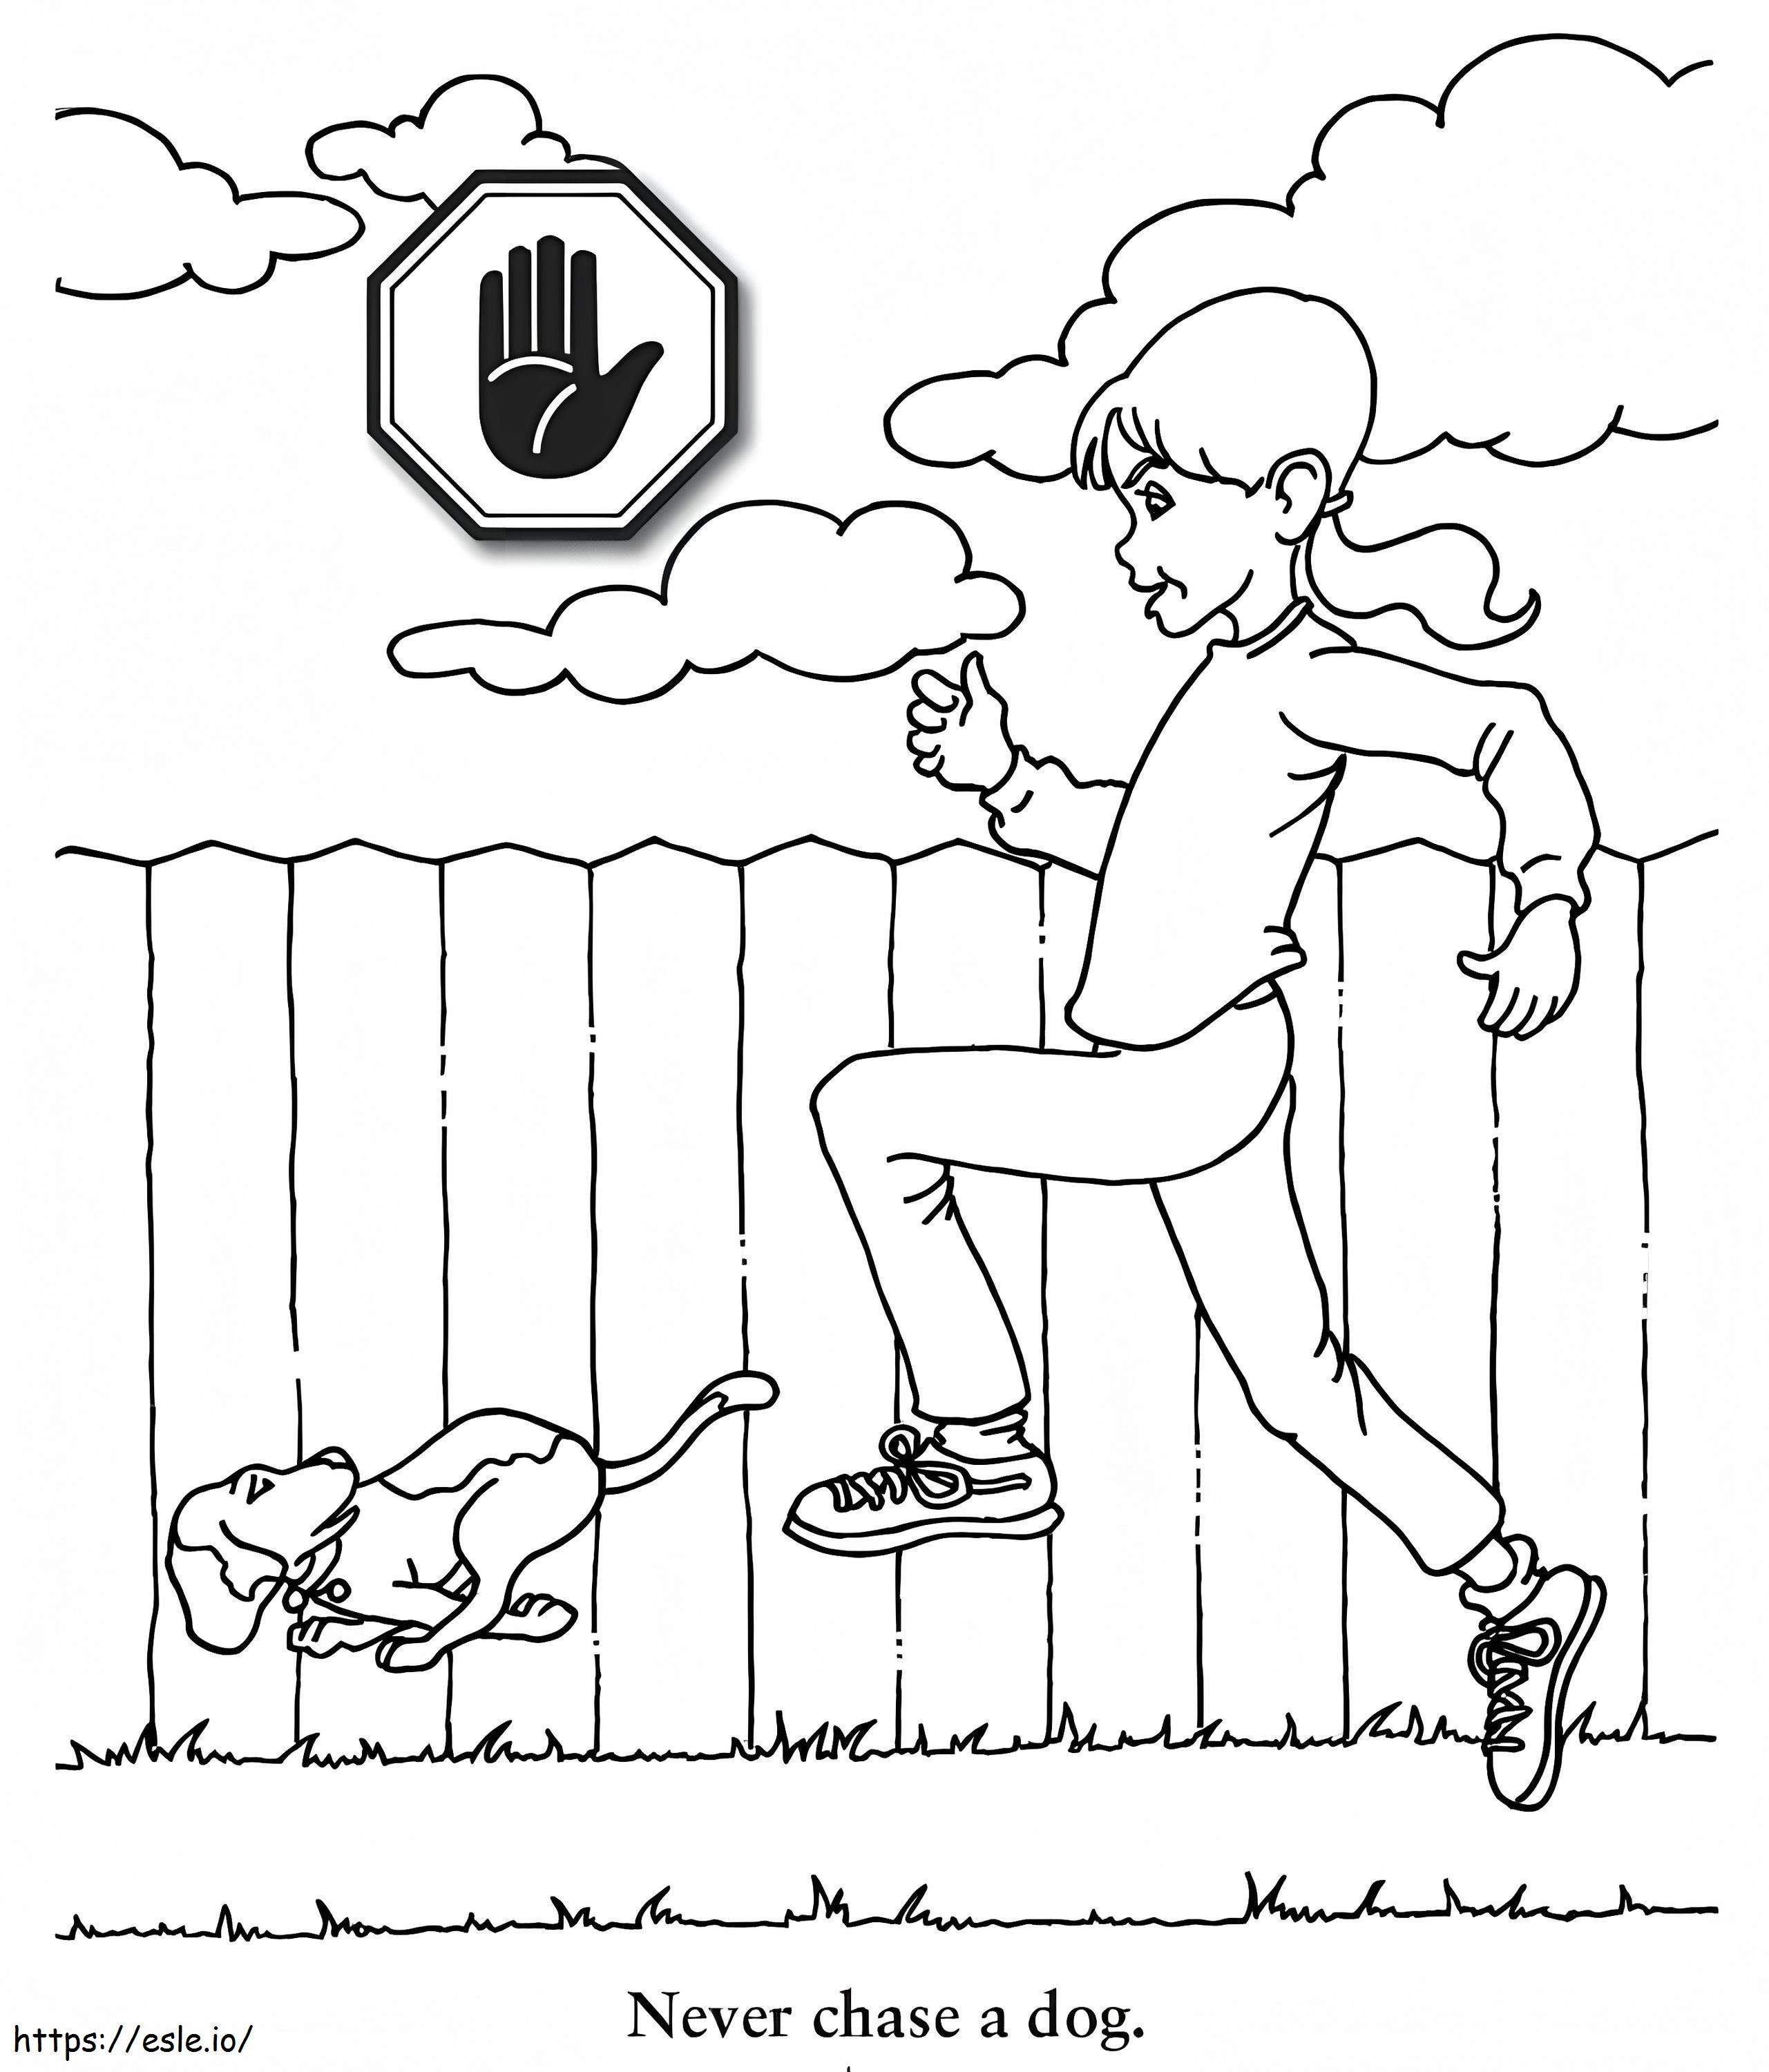 Never Chase A Dog coloring page